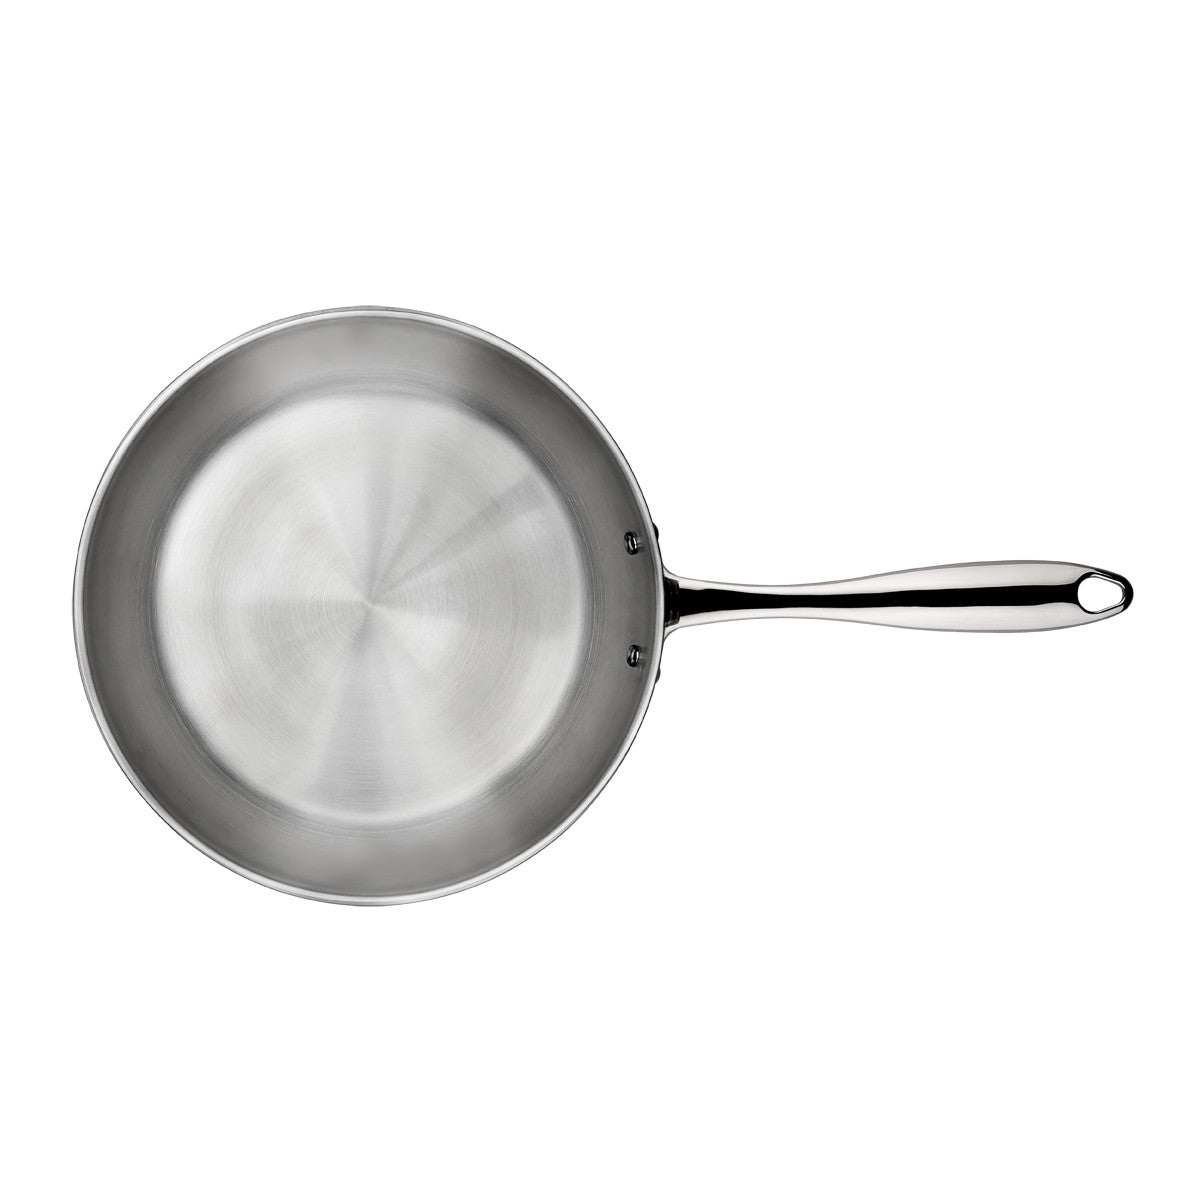 FRYING PAN 24 cm Steely Classic Pro